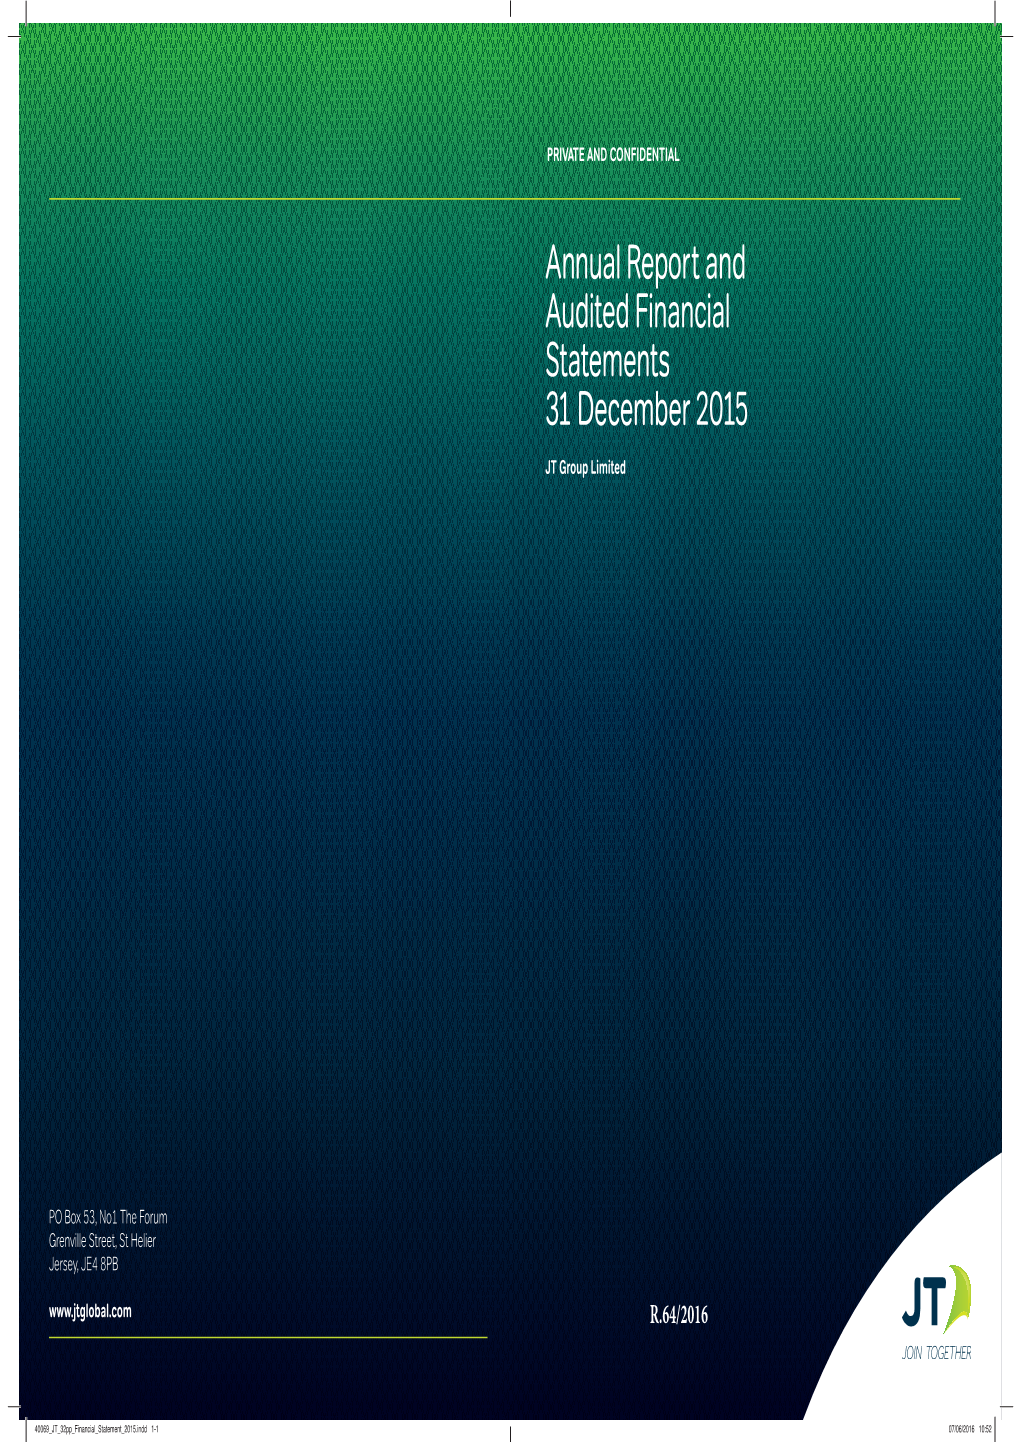 Annual Report and Audited Financial Statements 31 December 2015